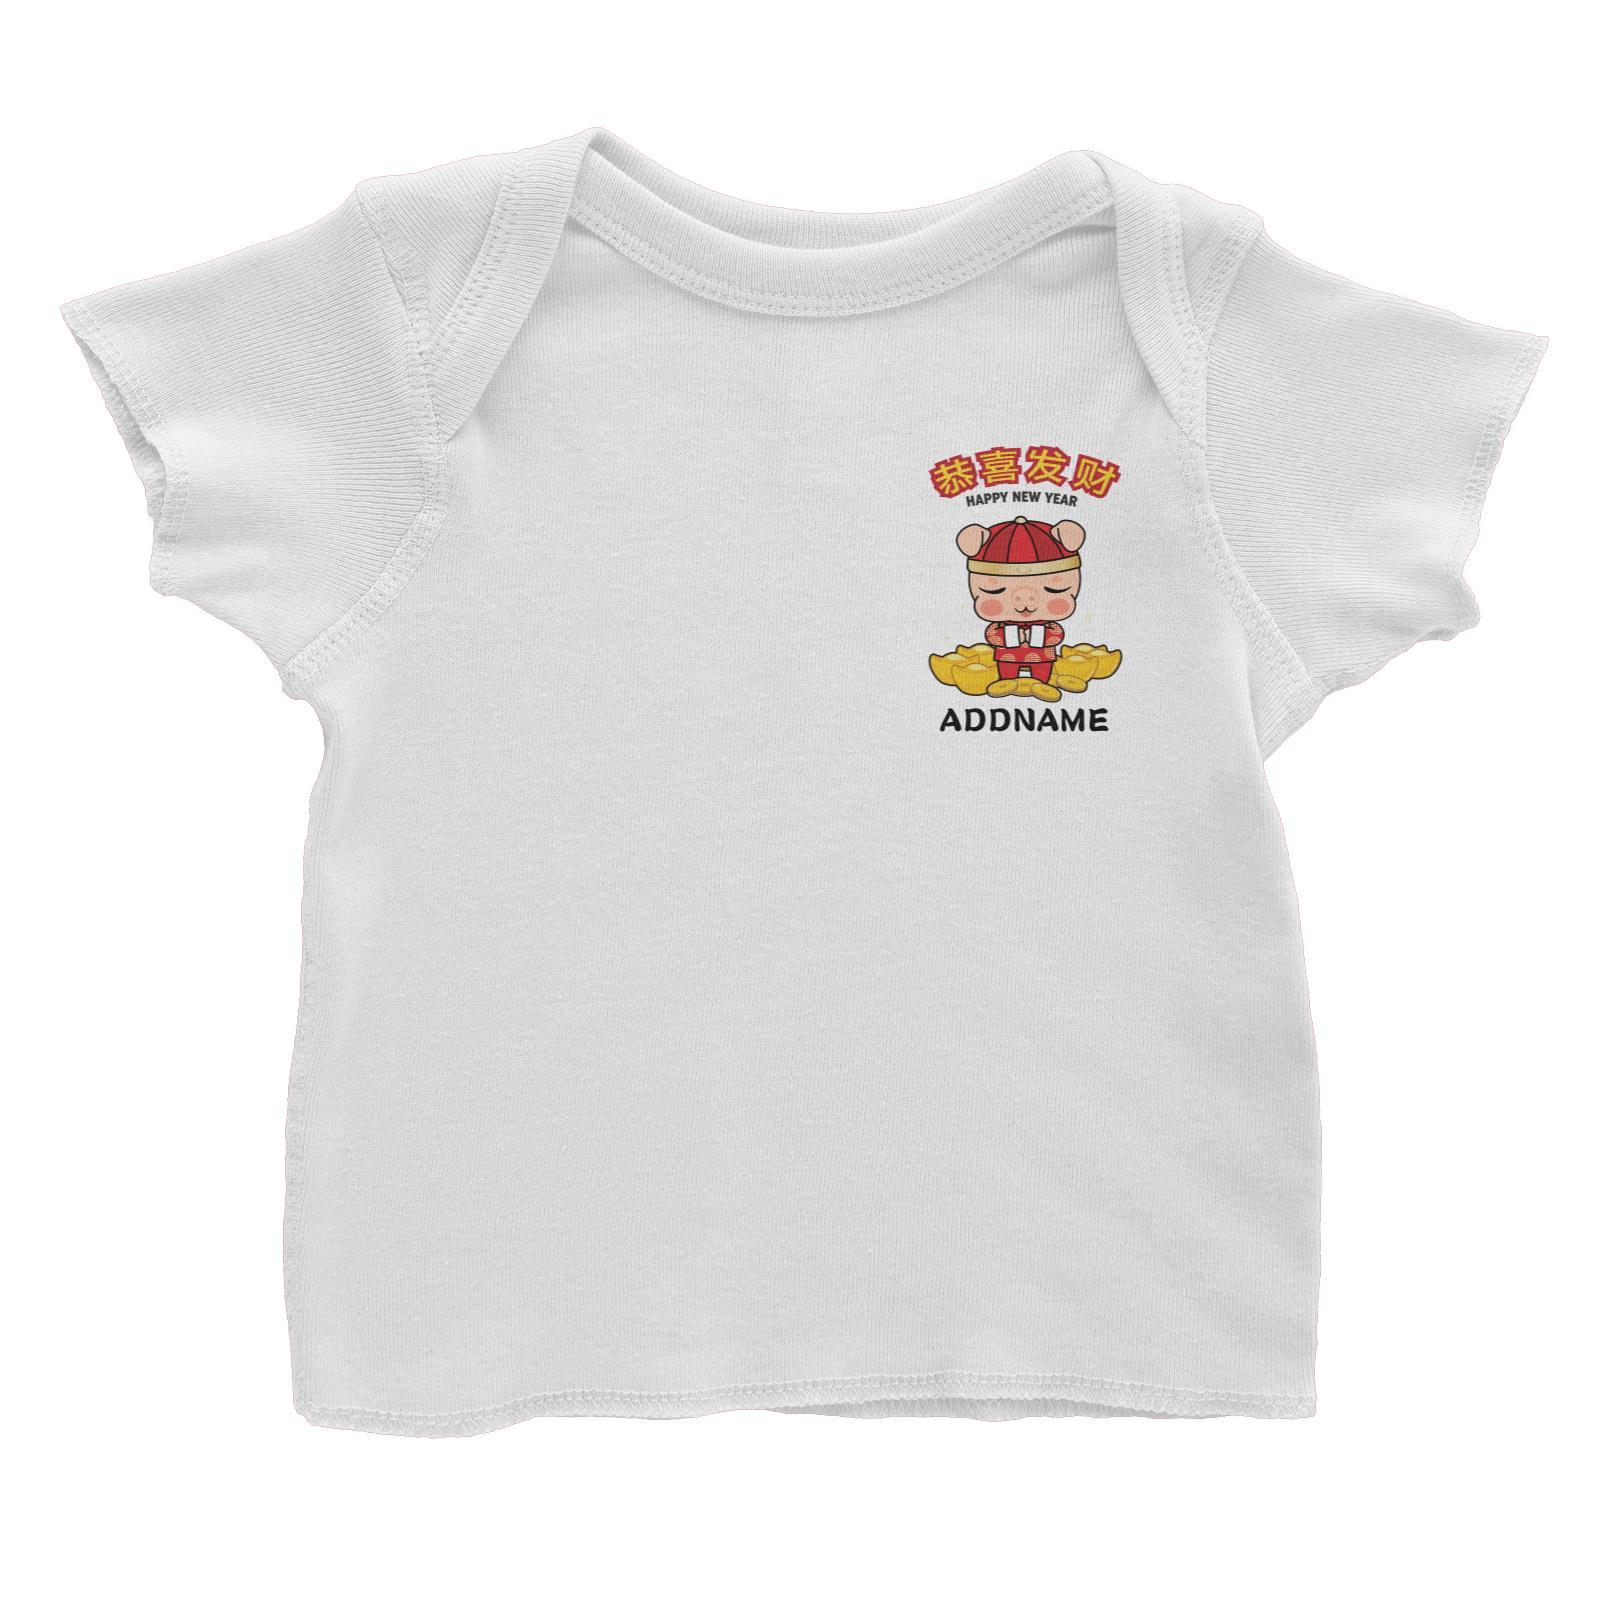 Prosperity Pig with Gold and Coins Pocket Design Baby T-Shirt